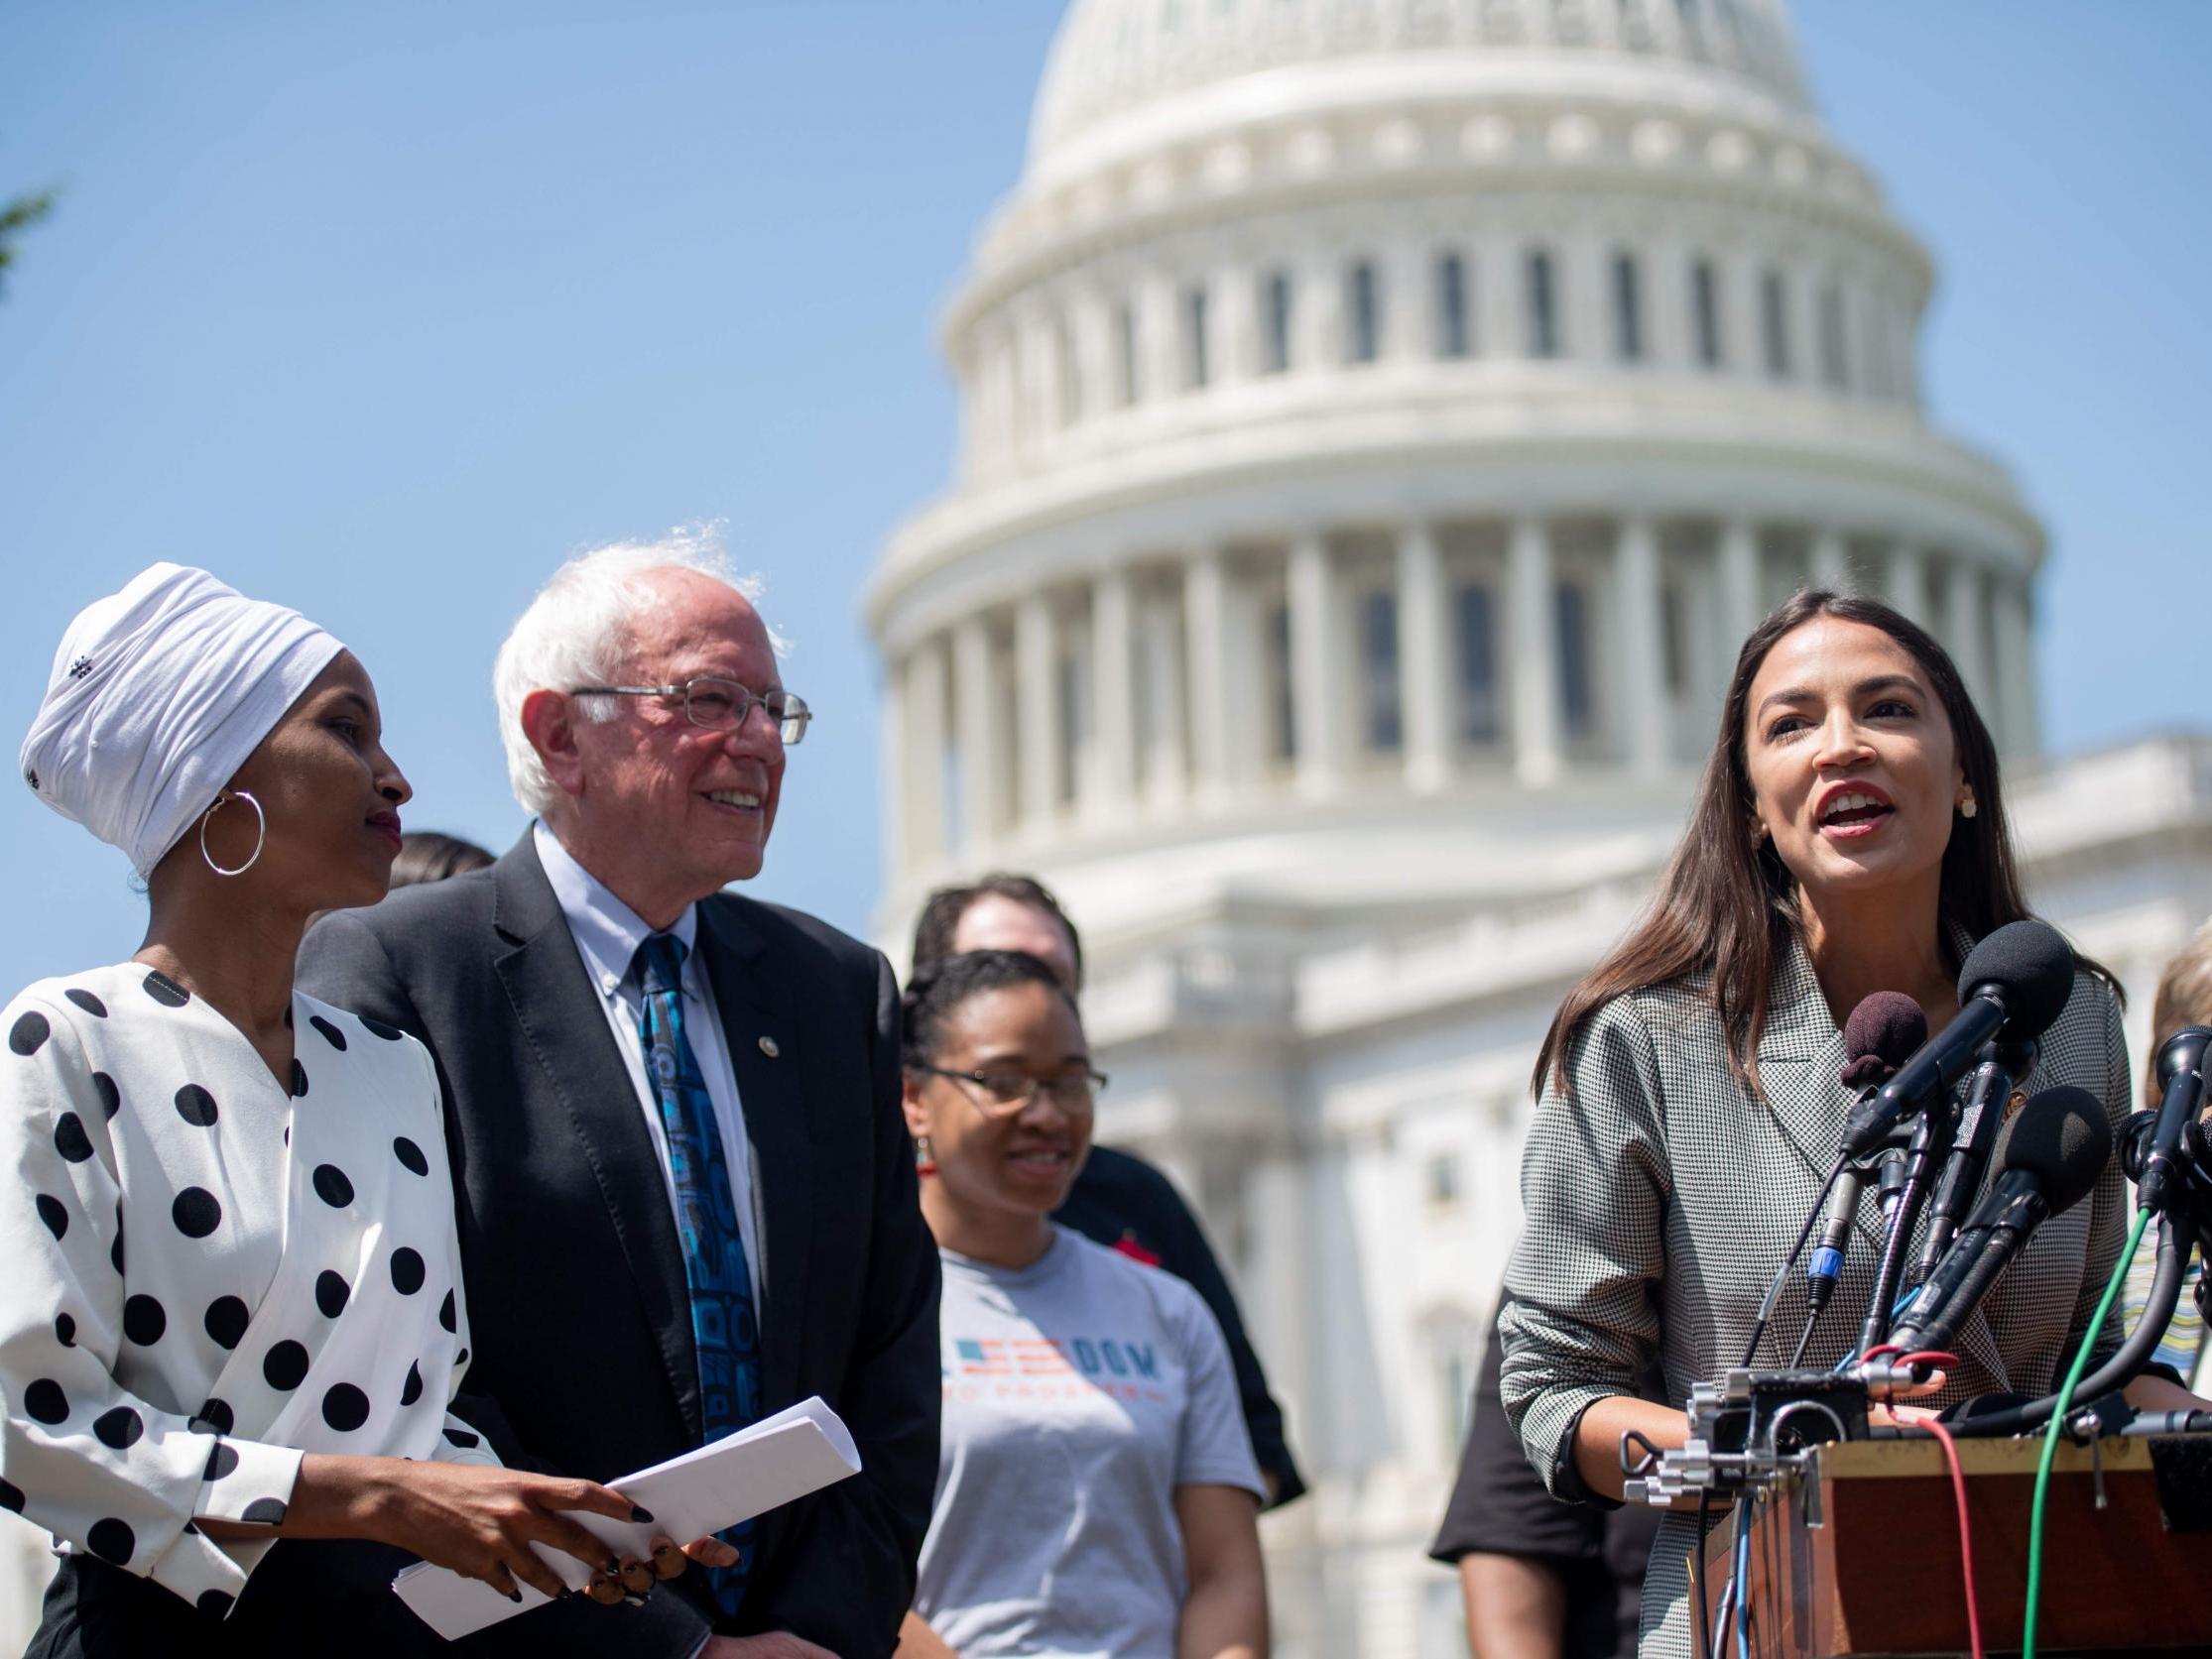 Mr Sanders will be endorsed on by Ms Ocasio-Cortez at a rally in Queens, sources have said